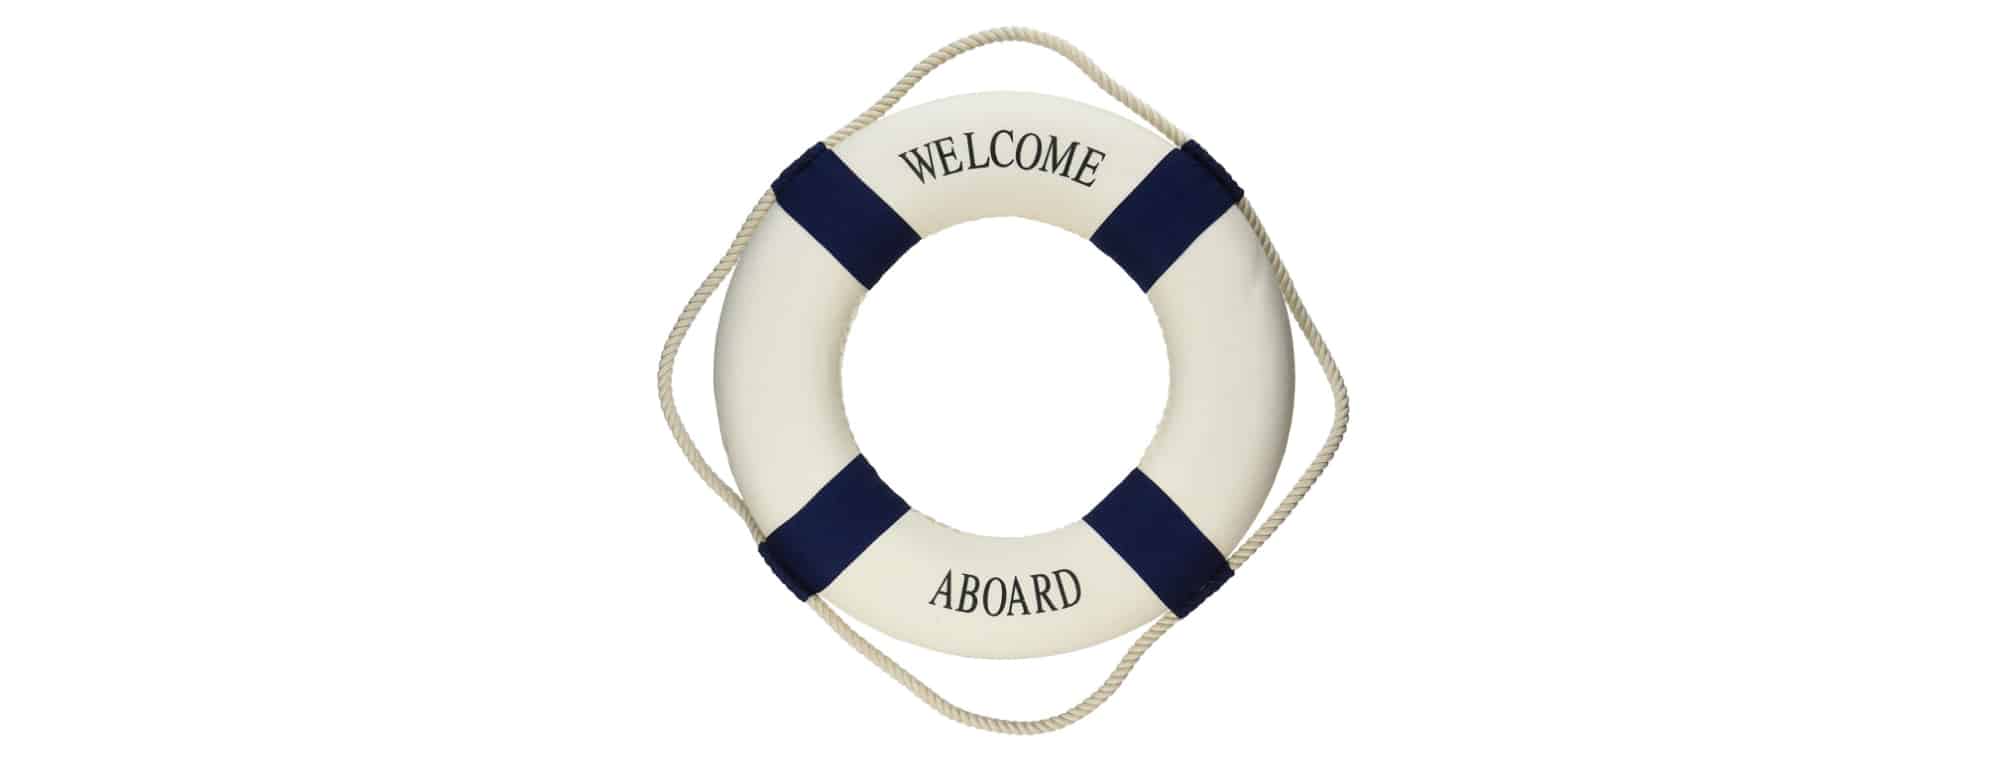 Welcome Aboard Life Ring